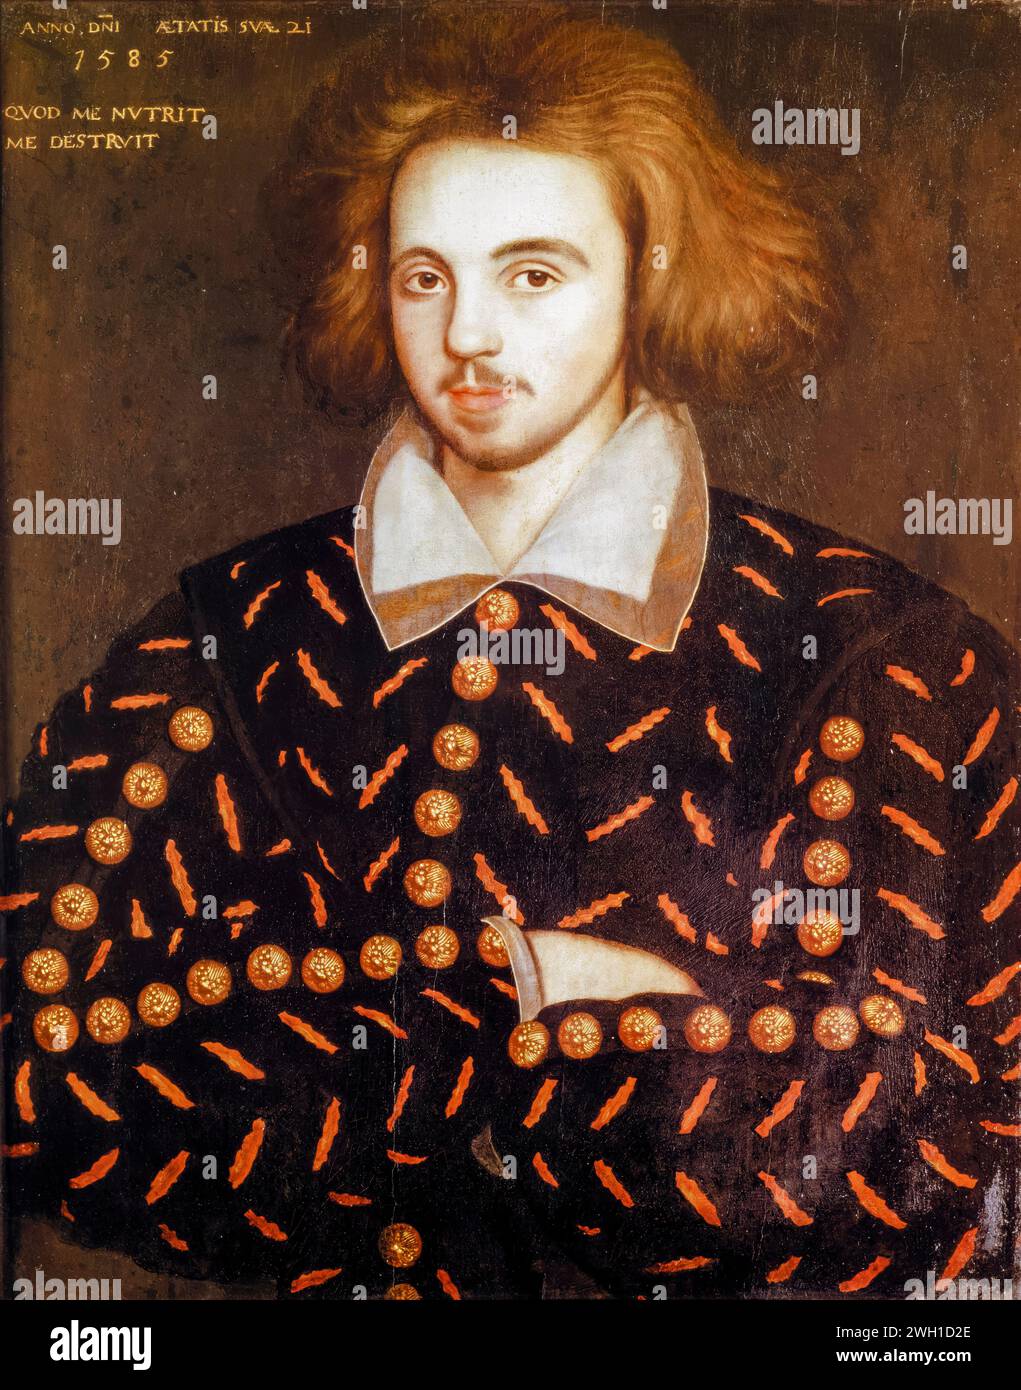 Christopher Marlowe, known as 'Kit Marlowe' (1564-1593), presumed portrait painting of the English playwright, poet, and translator of the Elizabethan era, portrait painting in oil on panel, 1585 Stock Photo